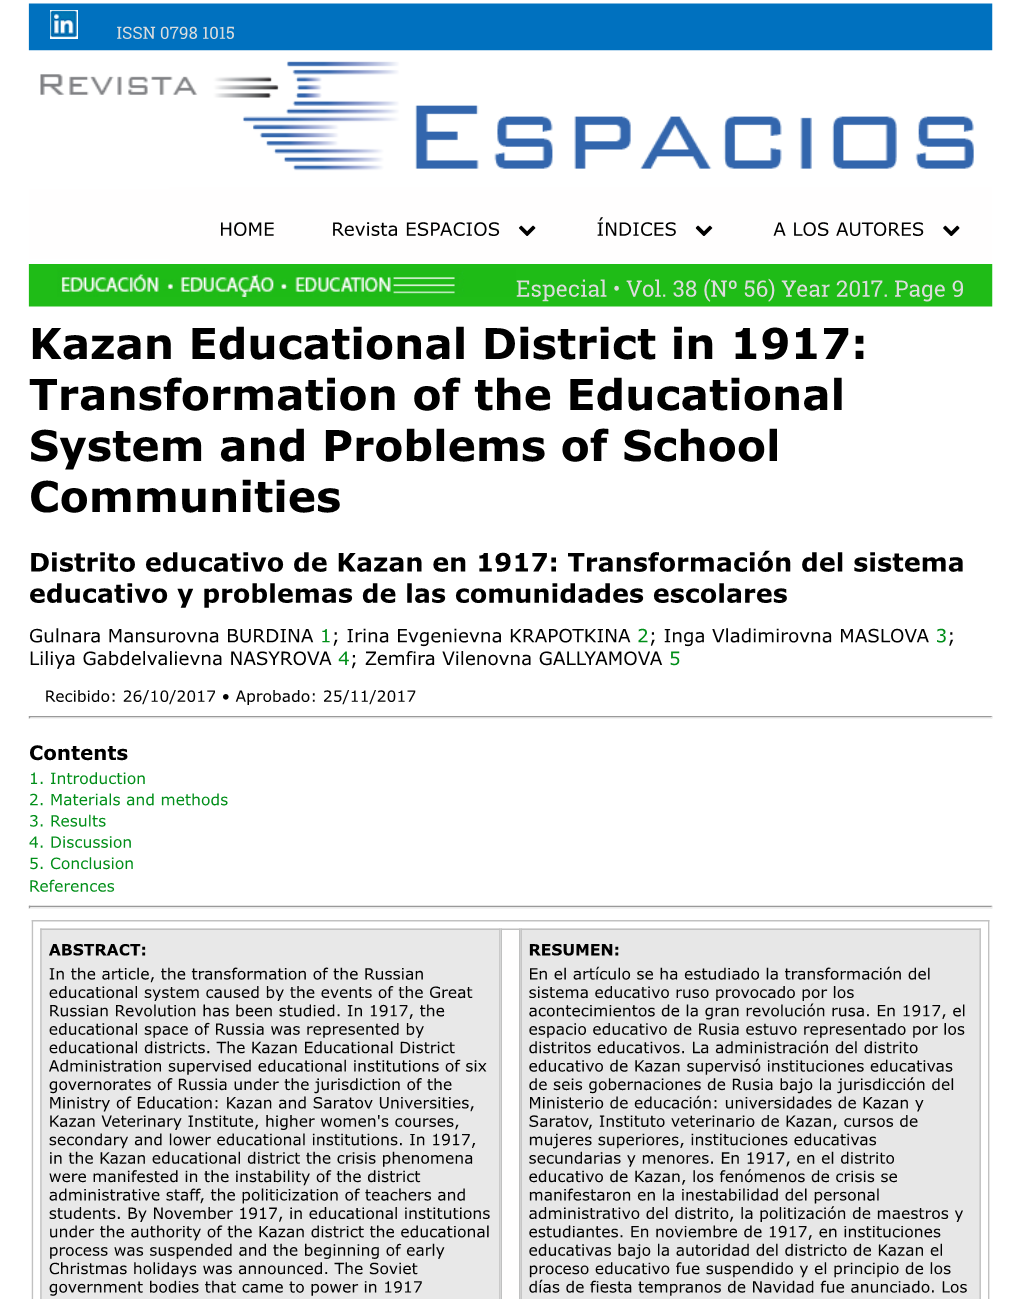 Kazan Educational District in 1917: Transformation of the Educational System and Problems of School Communities